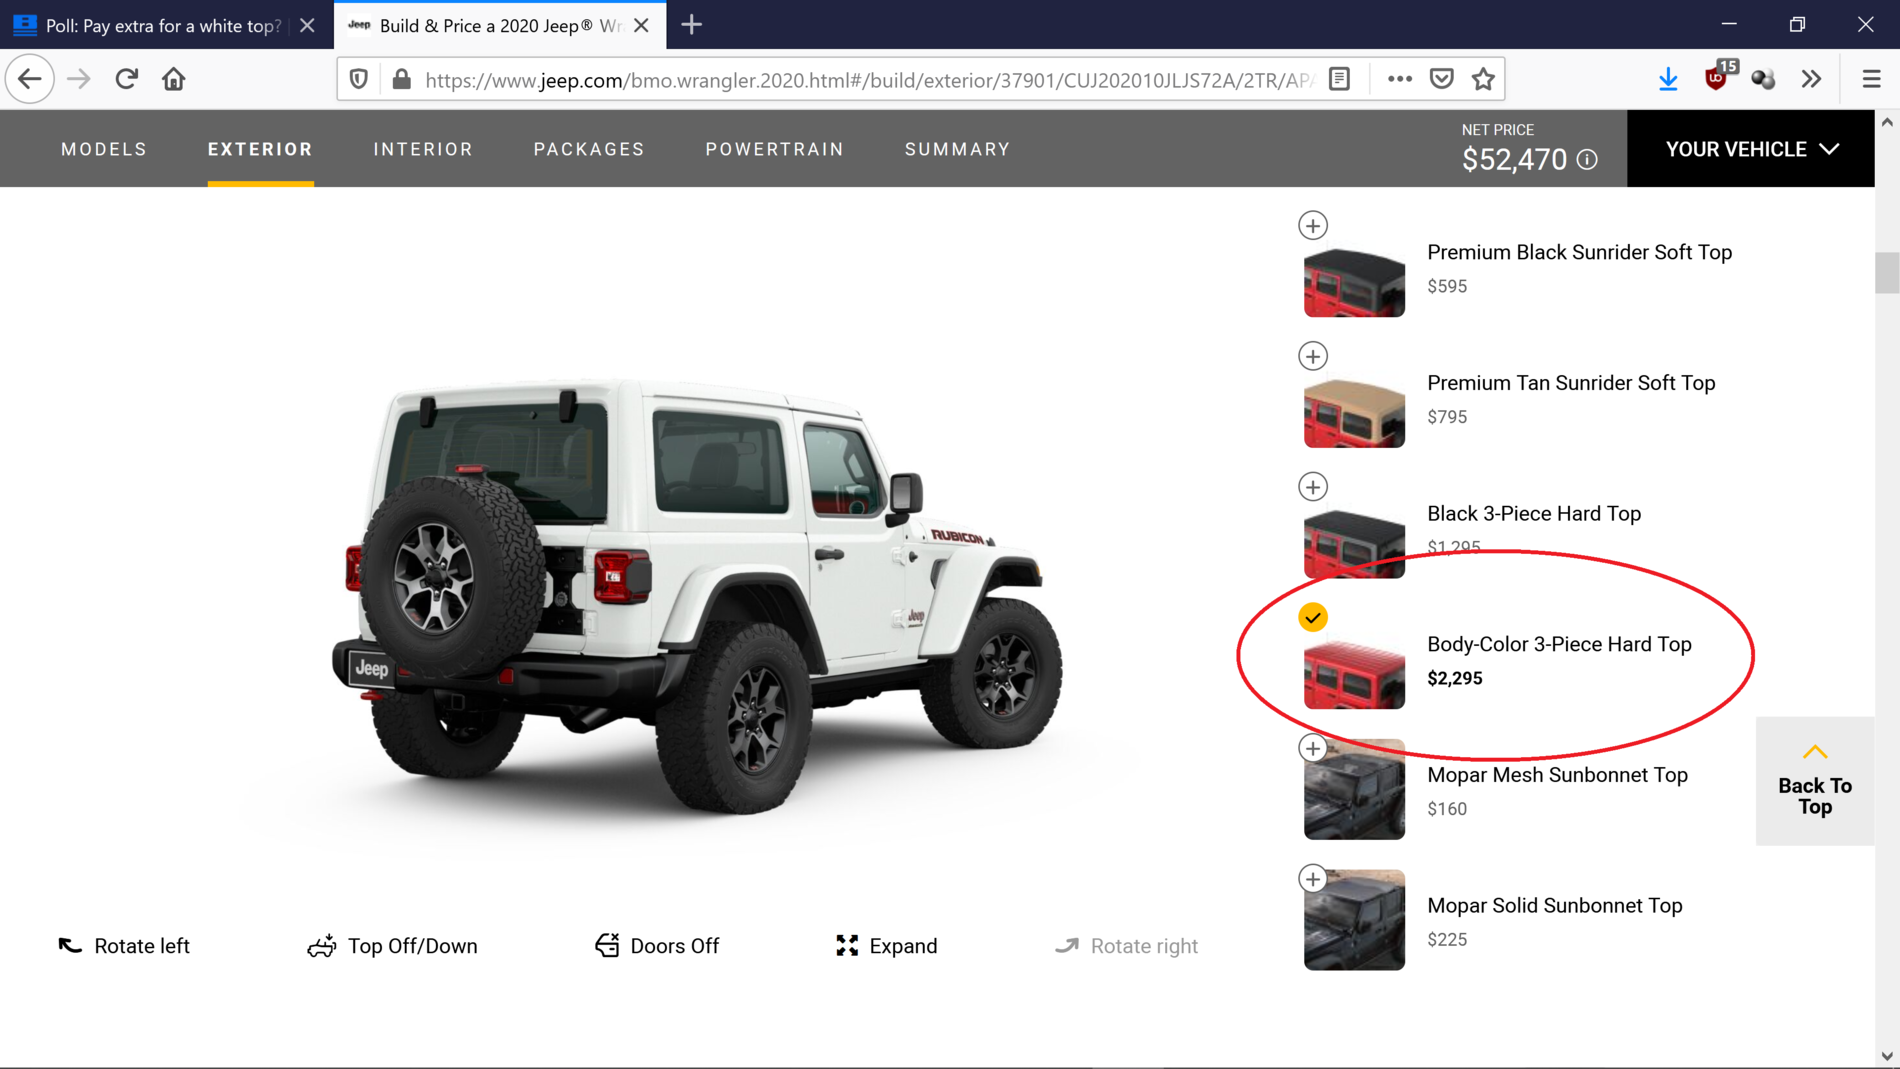 Ford Bronco Bronco White Tops, Multiple Vinyl Interior Colors & More Confirmed at Ford Employee Event Screenshot (2098)